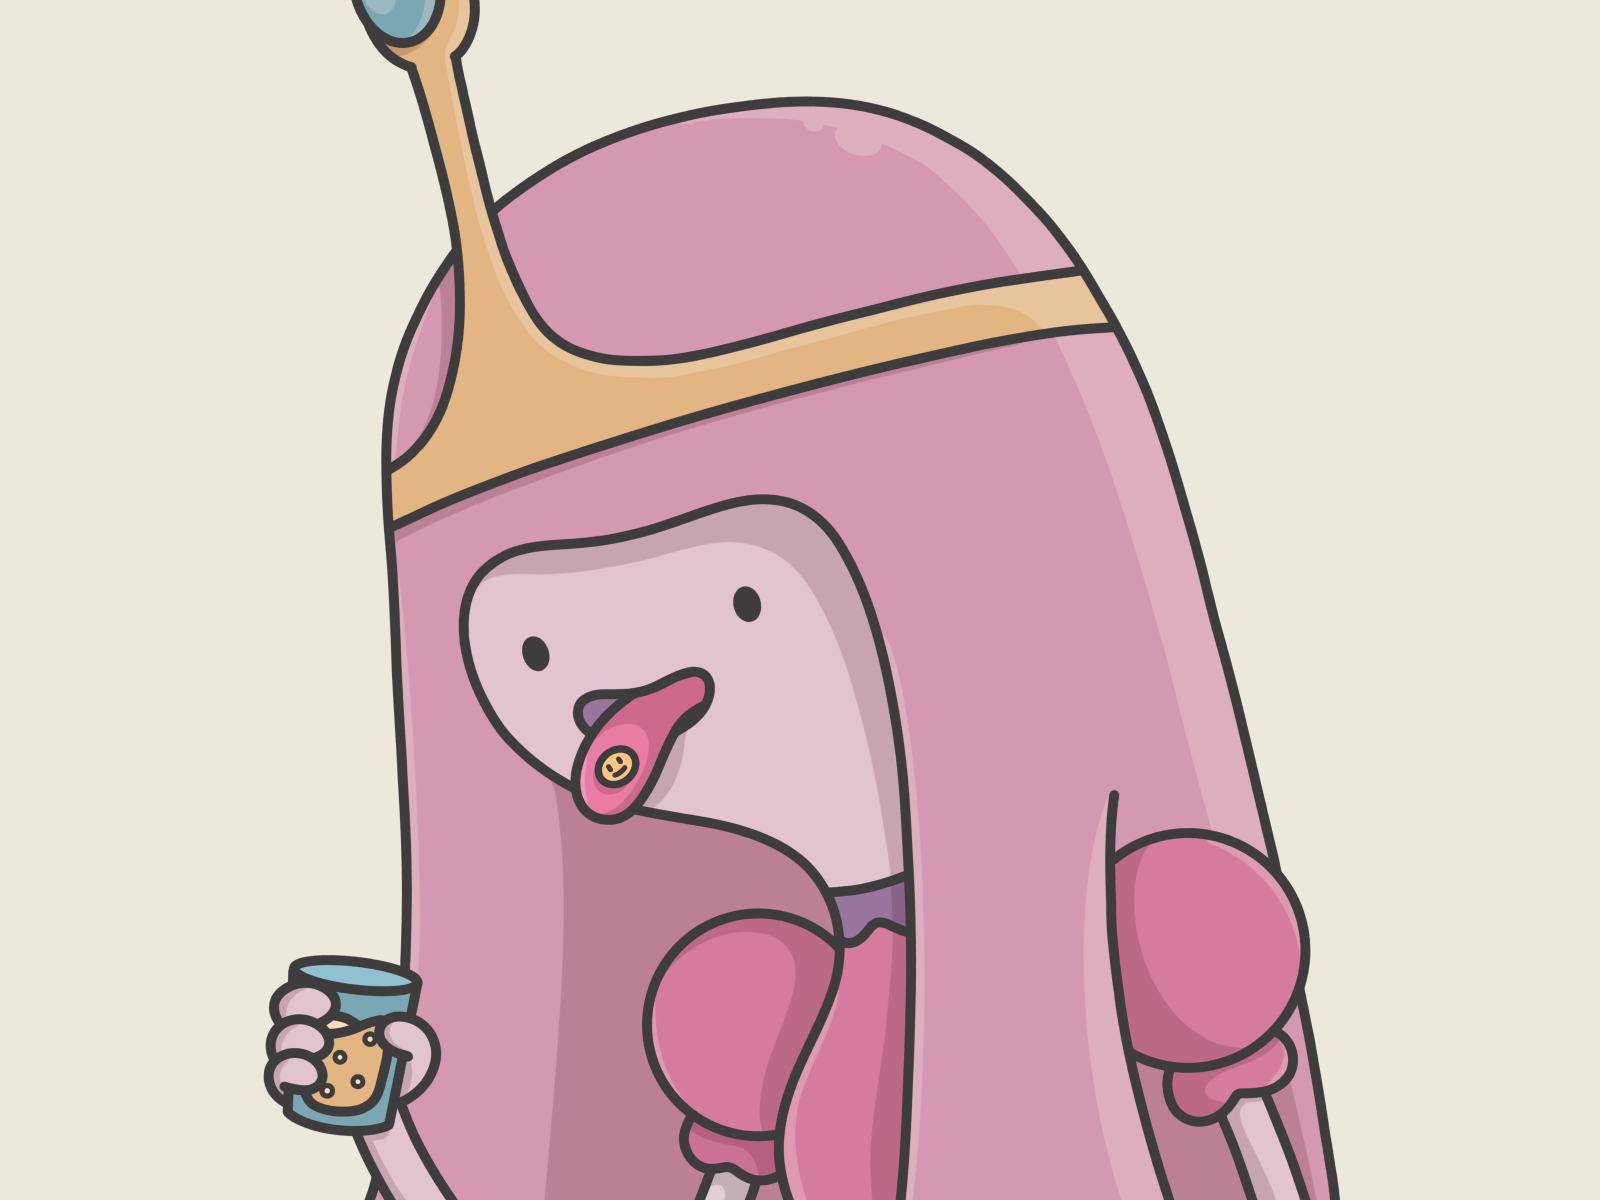 angela driskell recommends Pictures Of Princess Bubblegum From Adventure Time